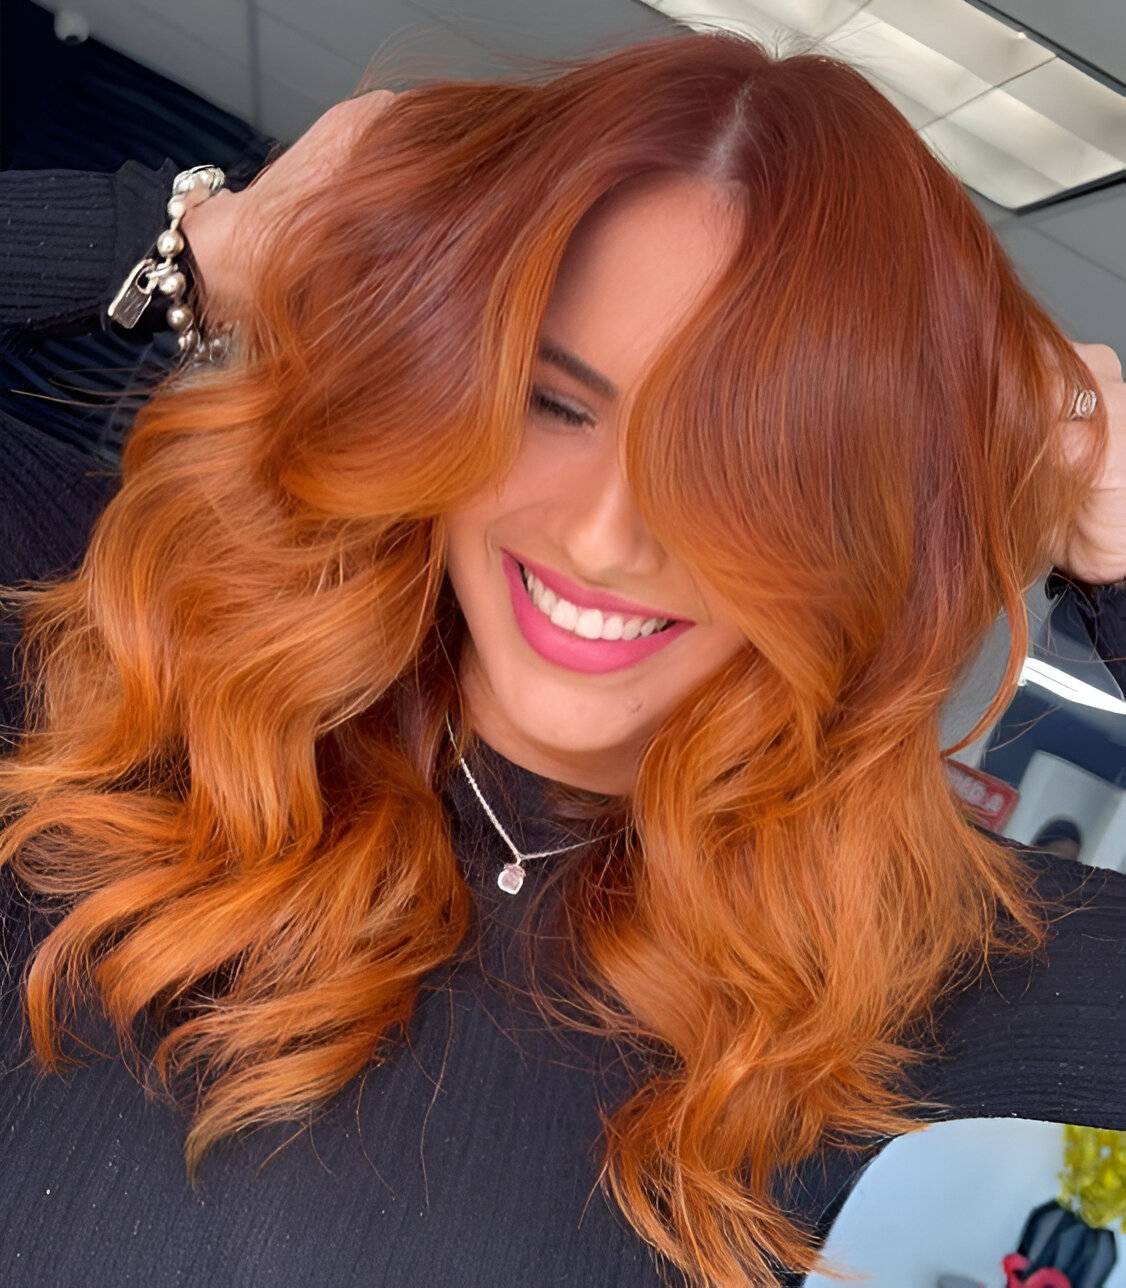 25 Gorgeous Orange Hair Ideas To Look Stunning Like A Model - 199